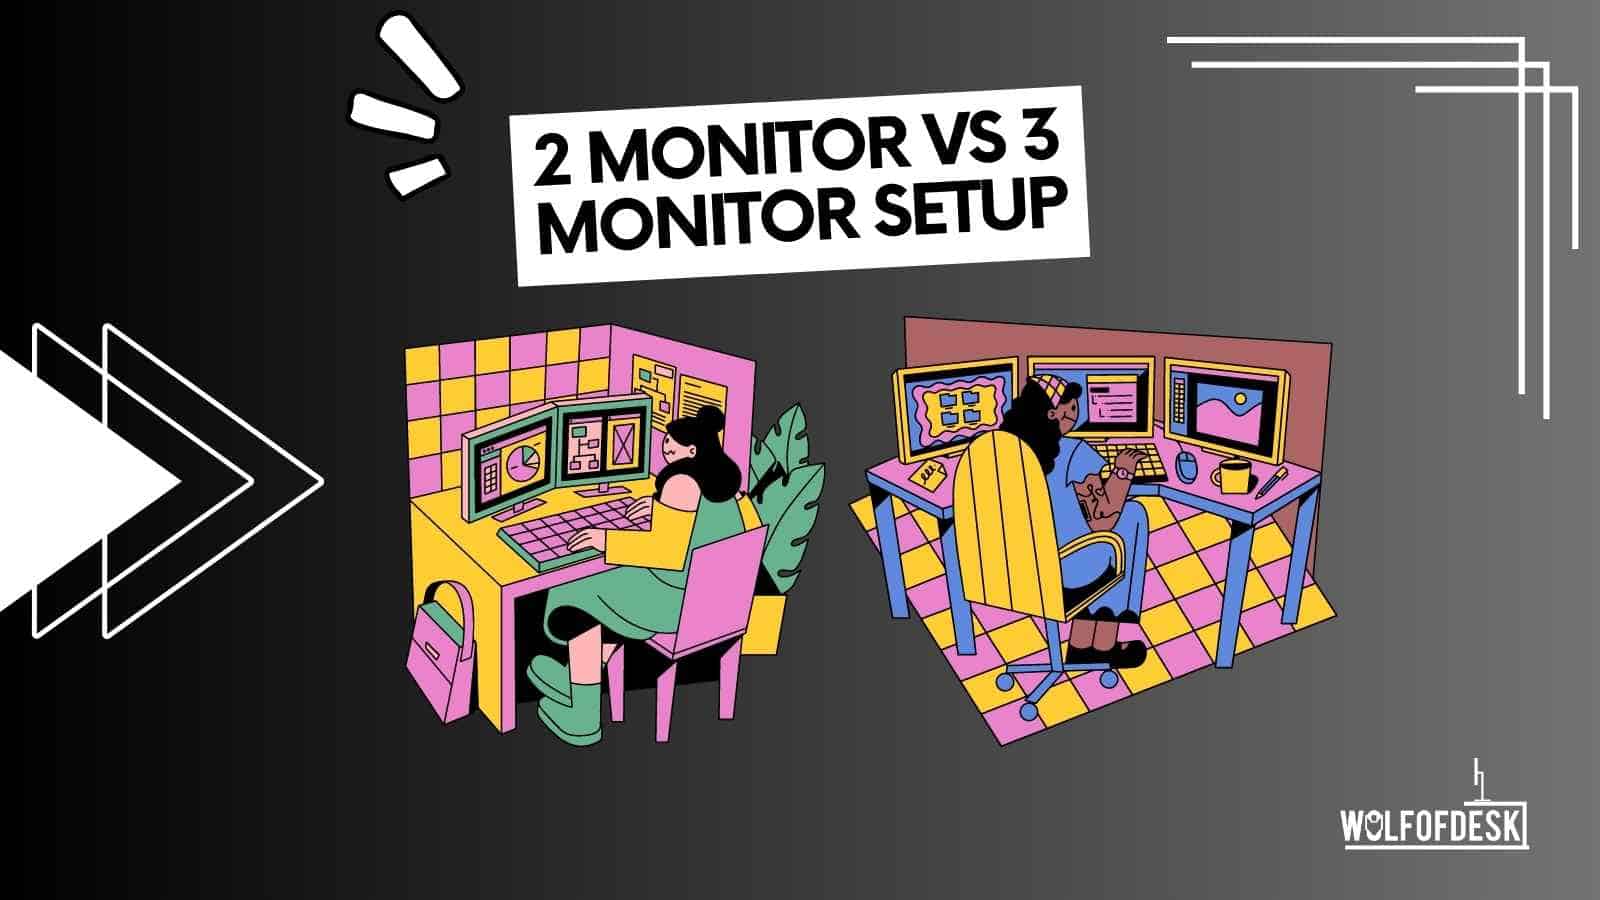 2 monitors vs 3 monitors: which is better?